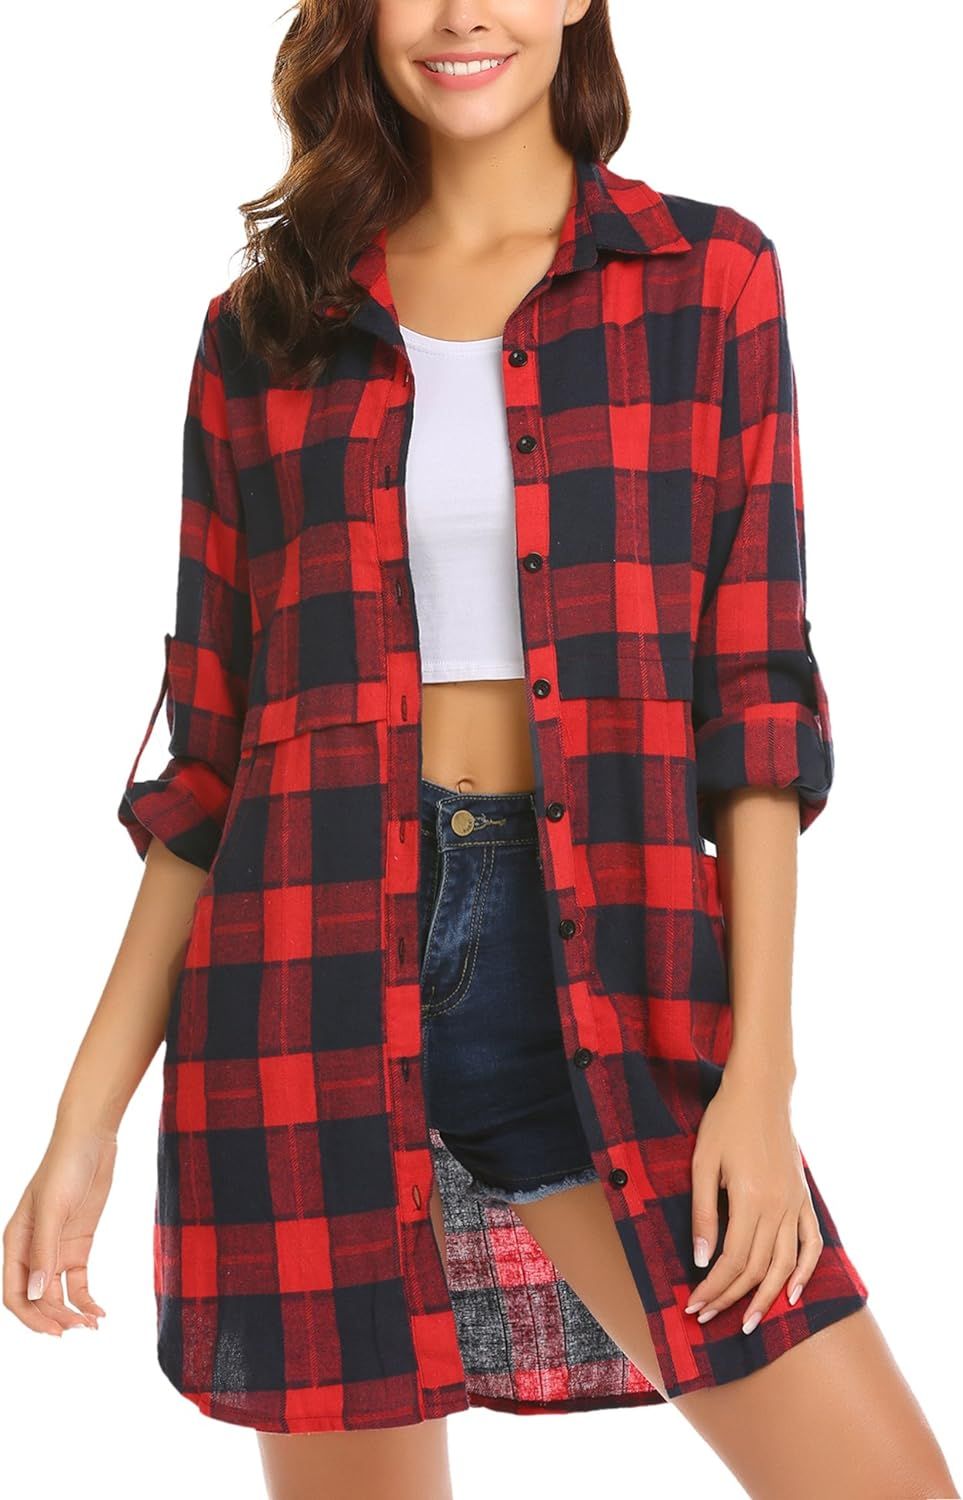 HOTOUCH Womens Flannel Plaid Shirts Roll Up Long Sleeve Pockets Mid-Long Casual Boyfriend Shirts | Amazon (US)